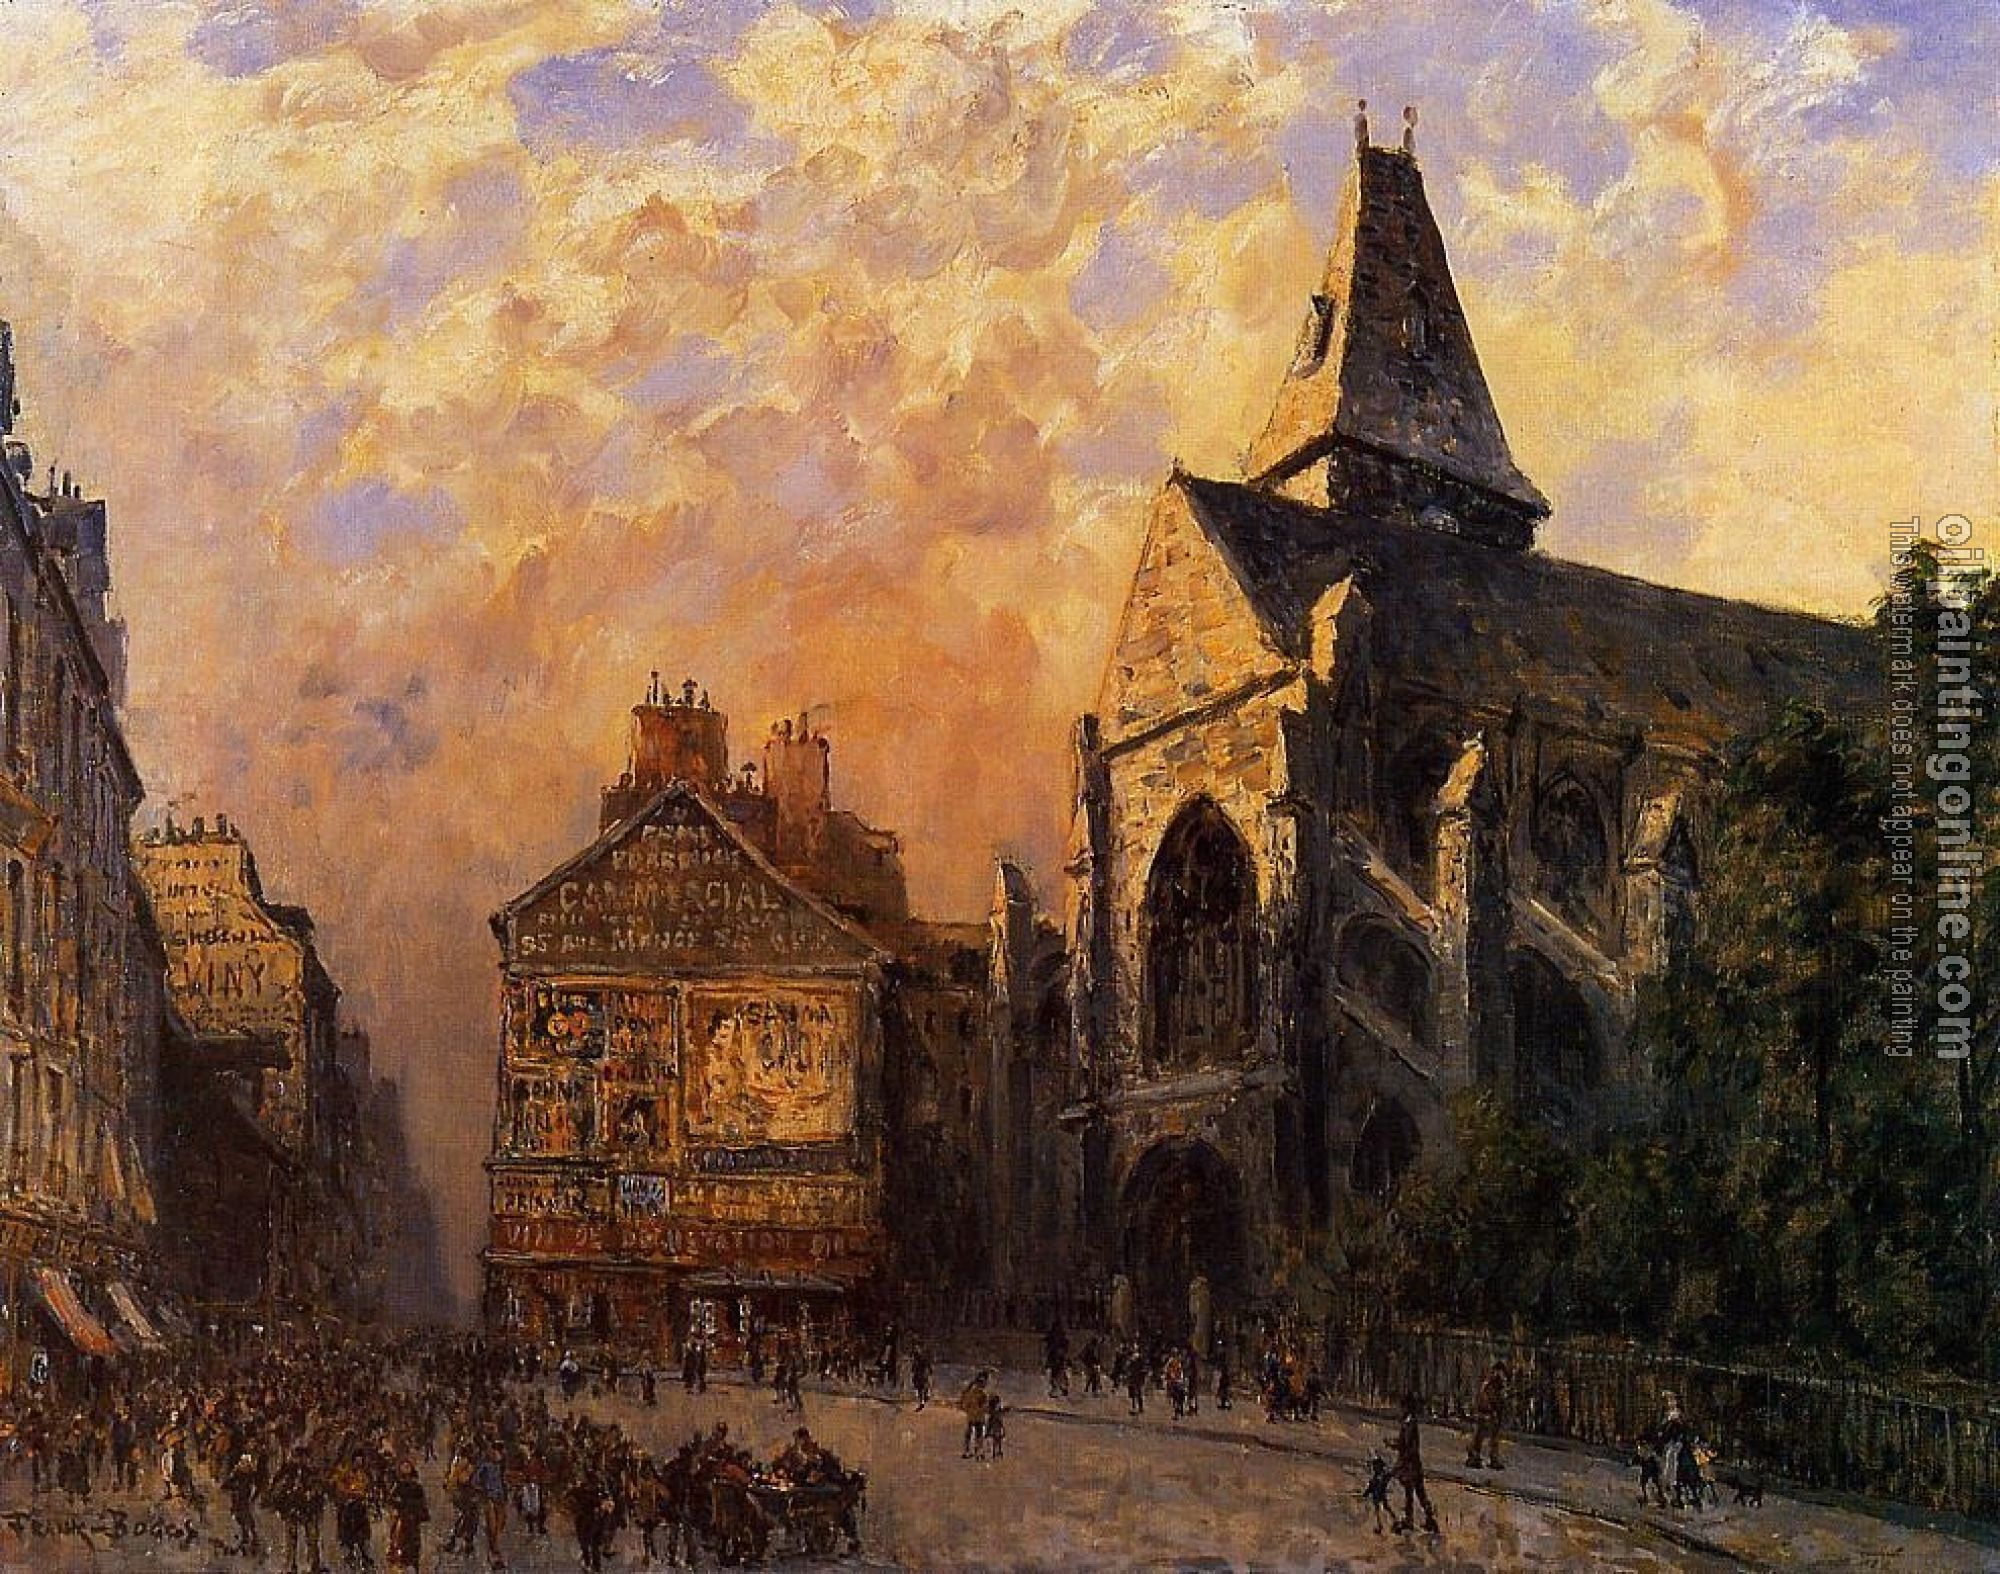 Boggs, Frank - Scene of a Street in front of the Church of Saint-Medard